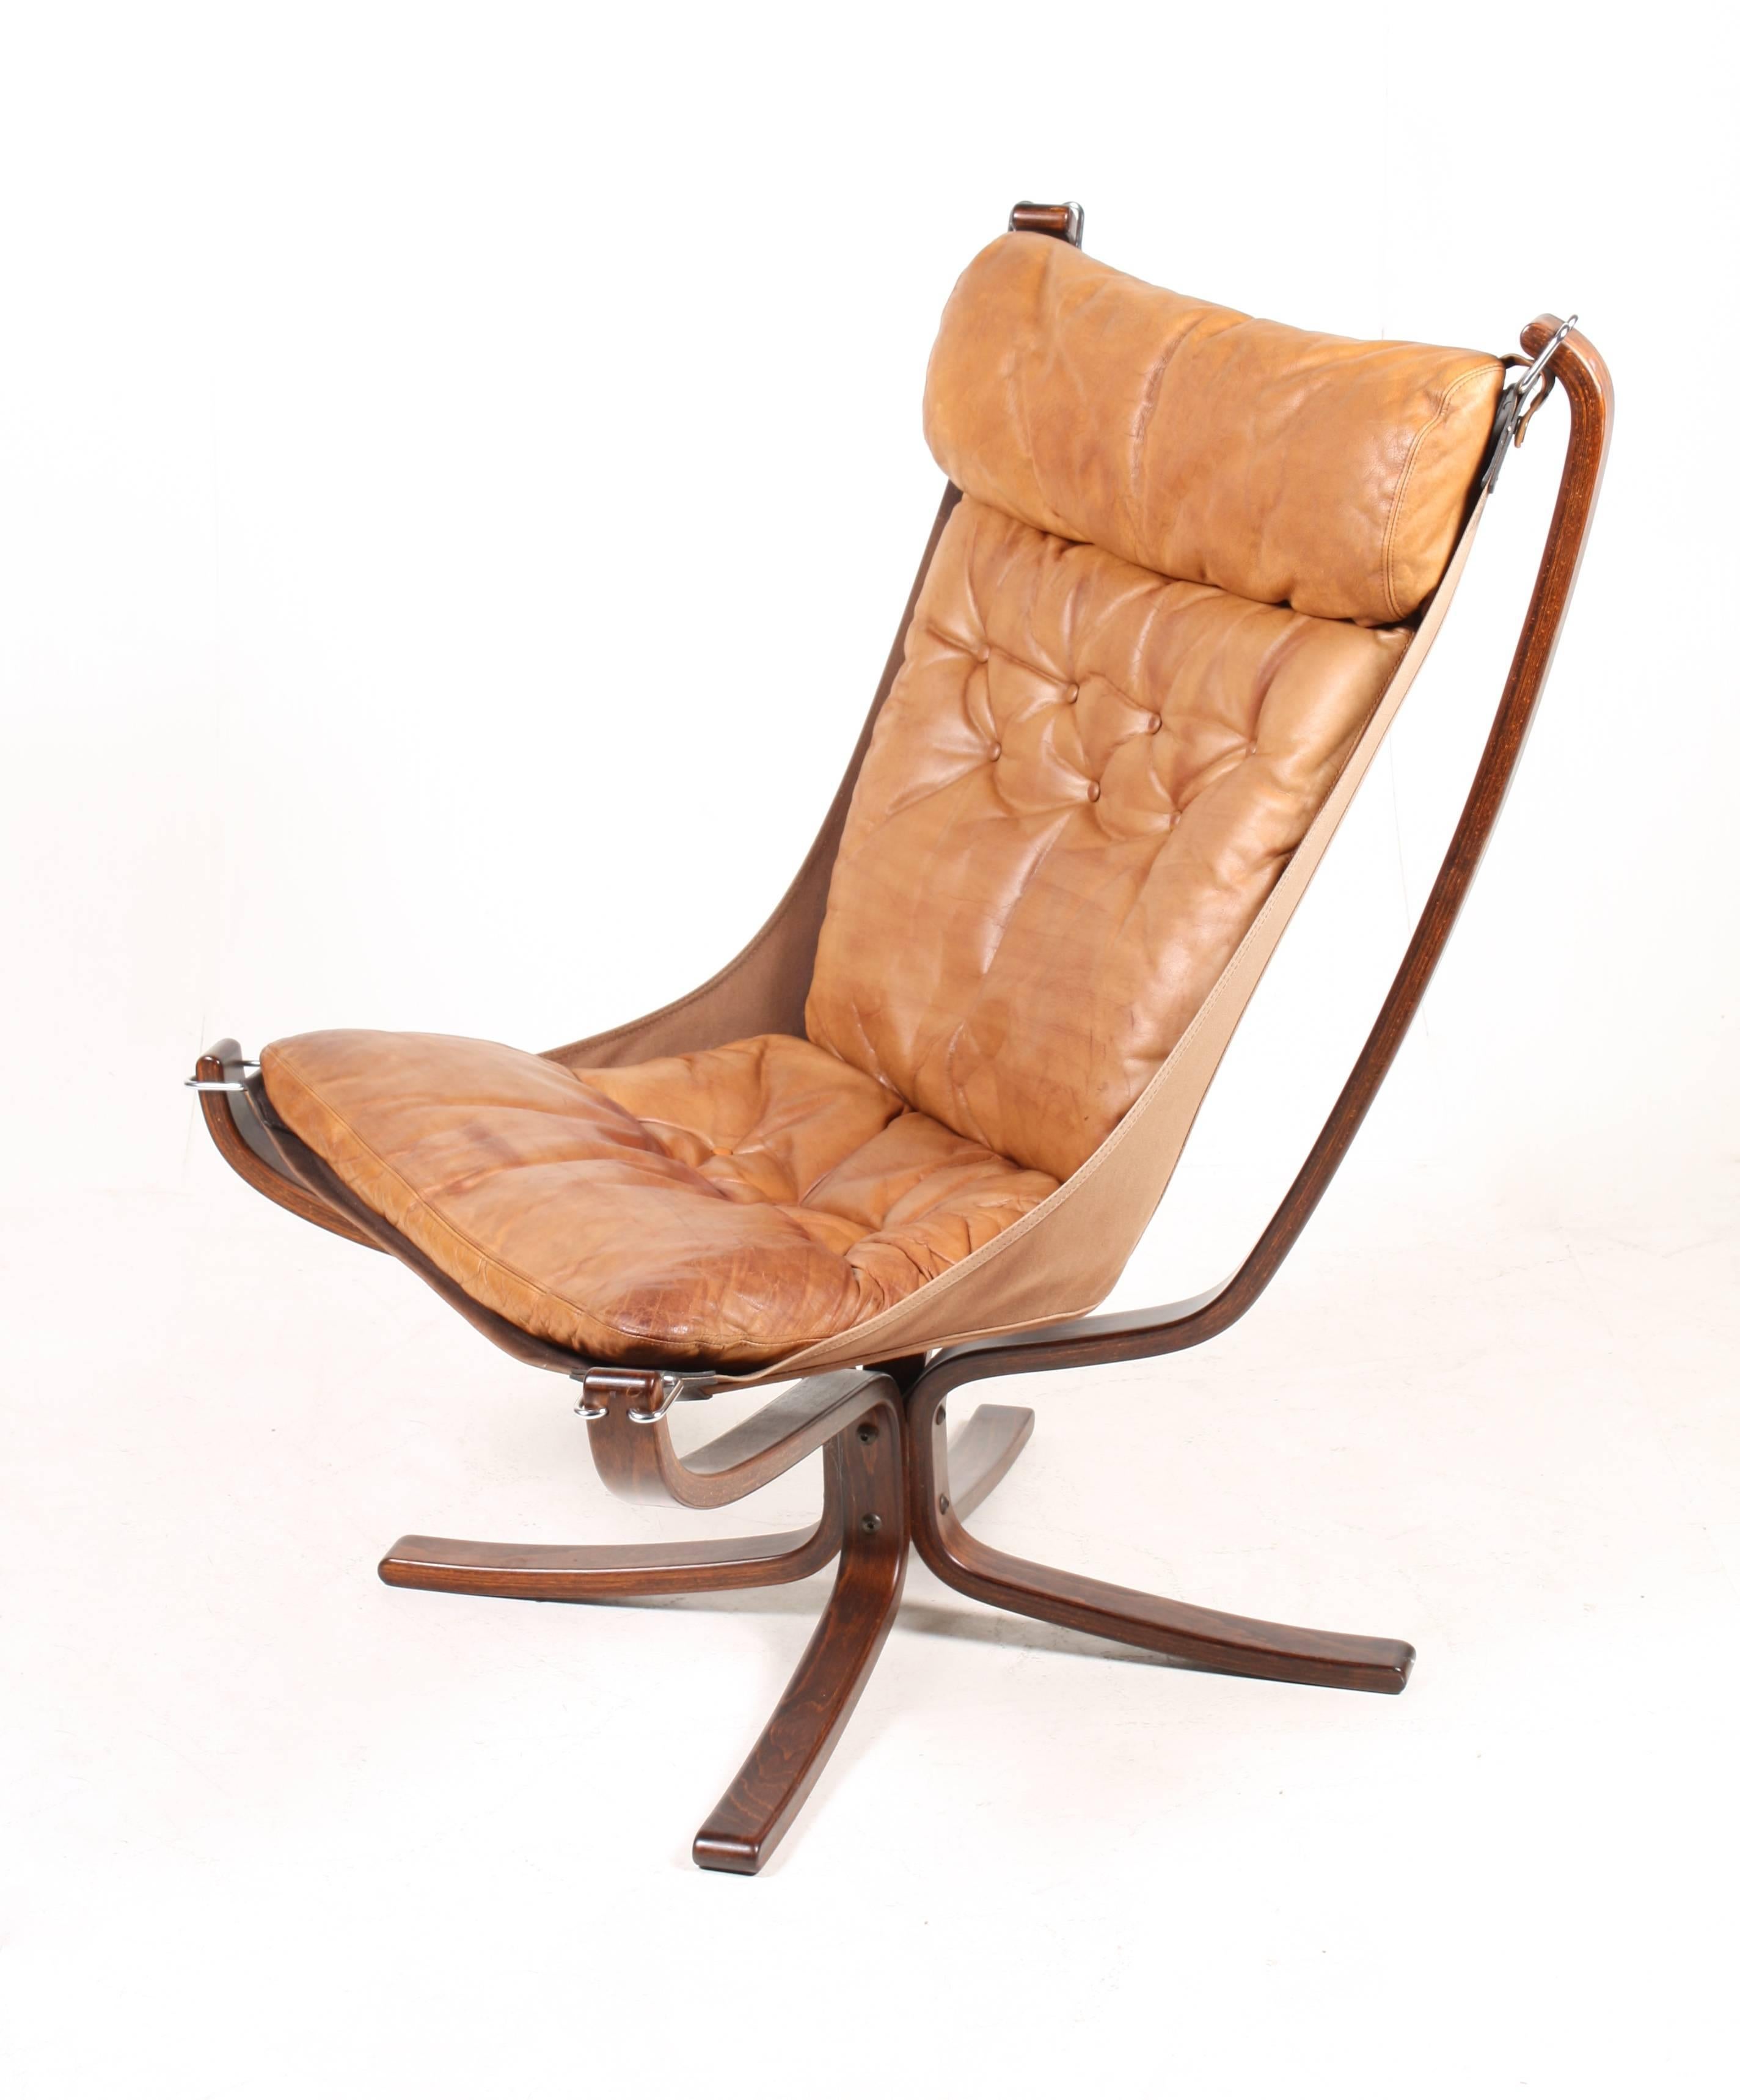 Pair of high back lounge chairs, stained beech frame and cushions in patinated leather. Designed by Sigurd Ressell for Vatne Furniture. Made in Norway. The chairs are in all original condition.